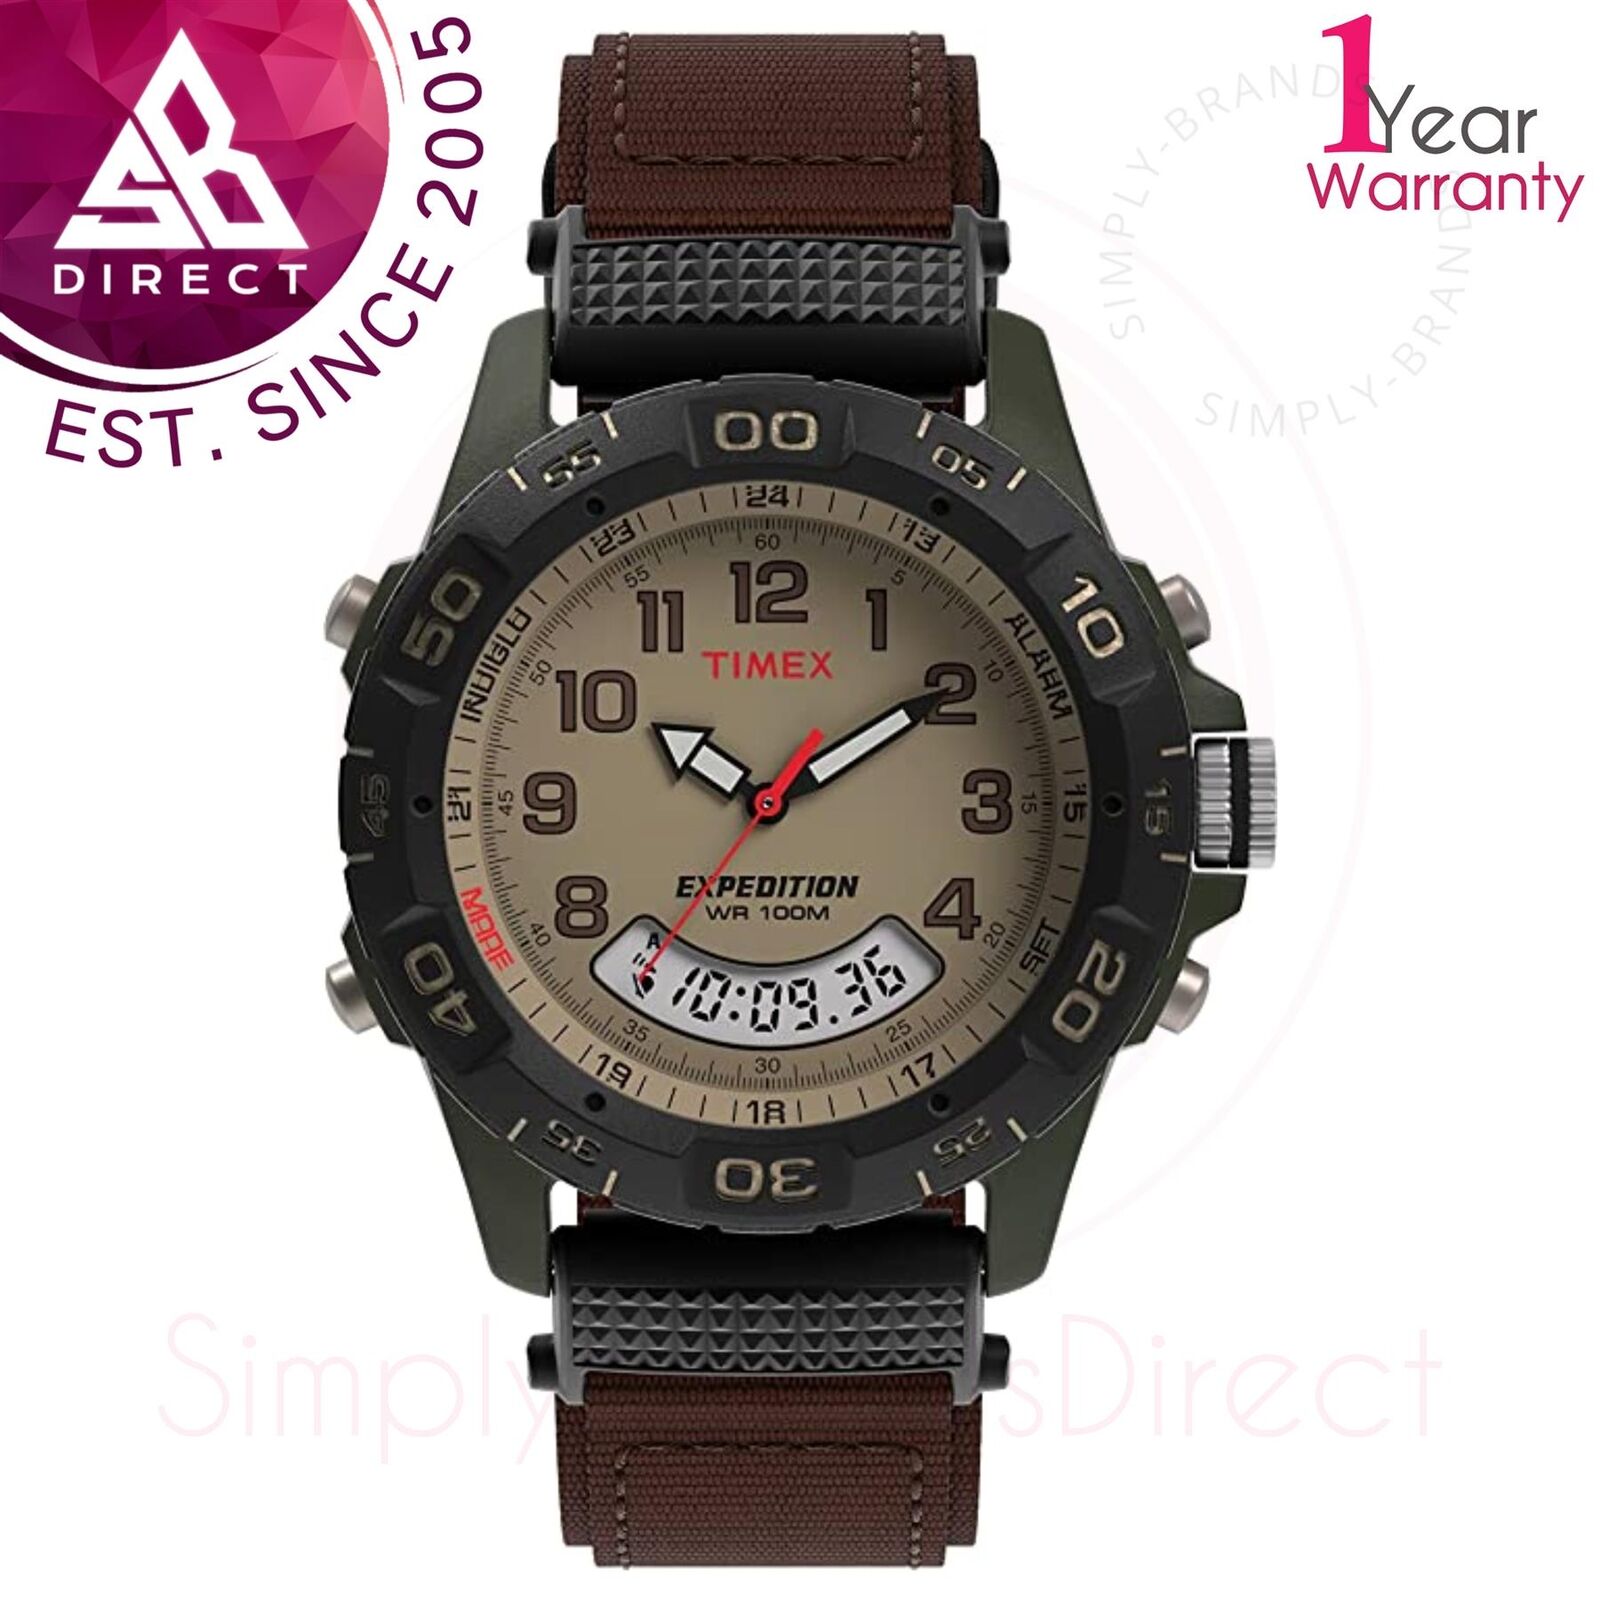 Timex Expedition Men's Quartz Rugged Watch│With Brown Nylon Strap│WR 100 M│39mm